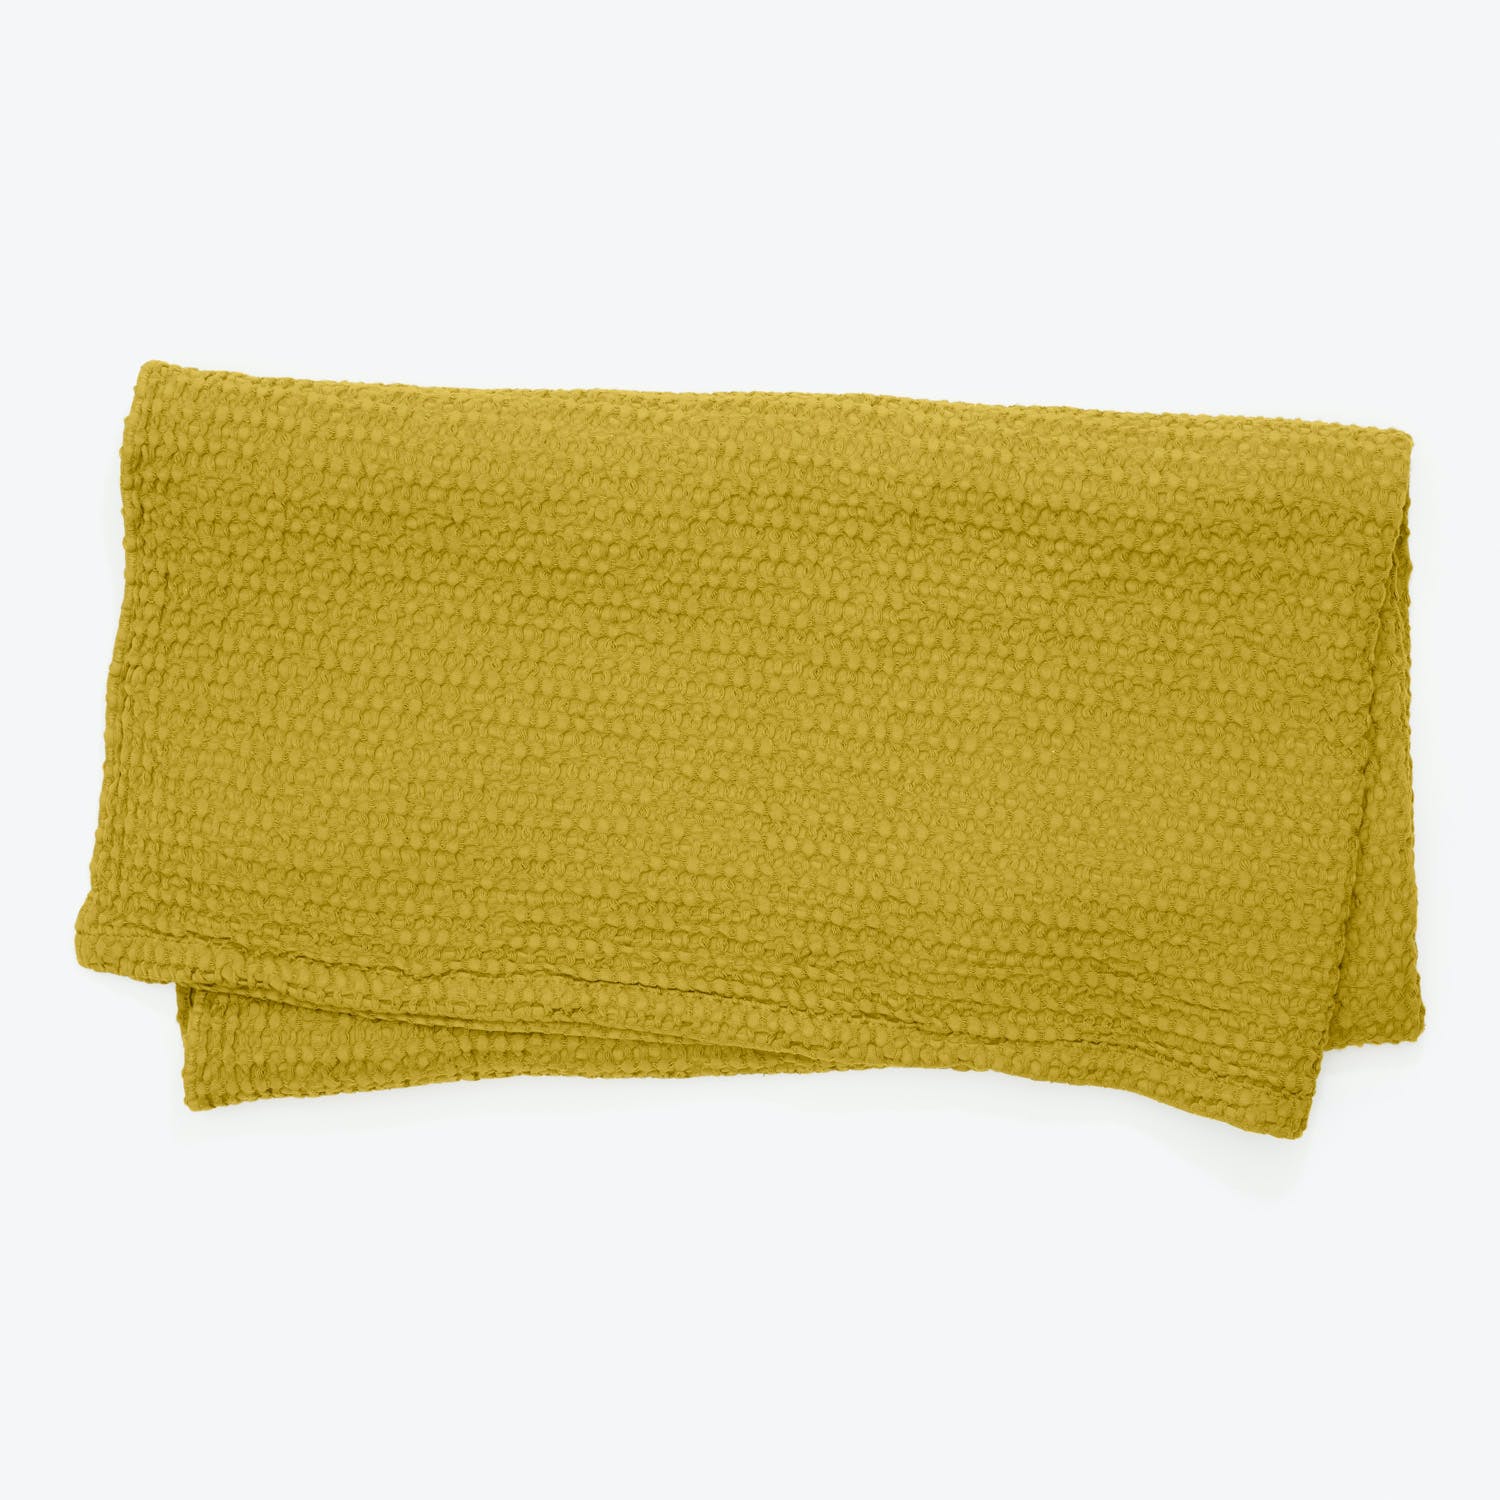 Folded mustard yellow towel with soft textured surface on white background.